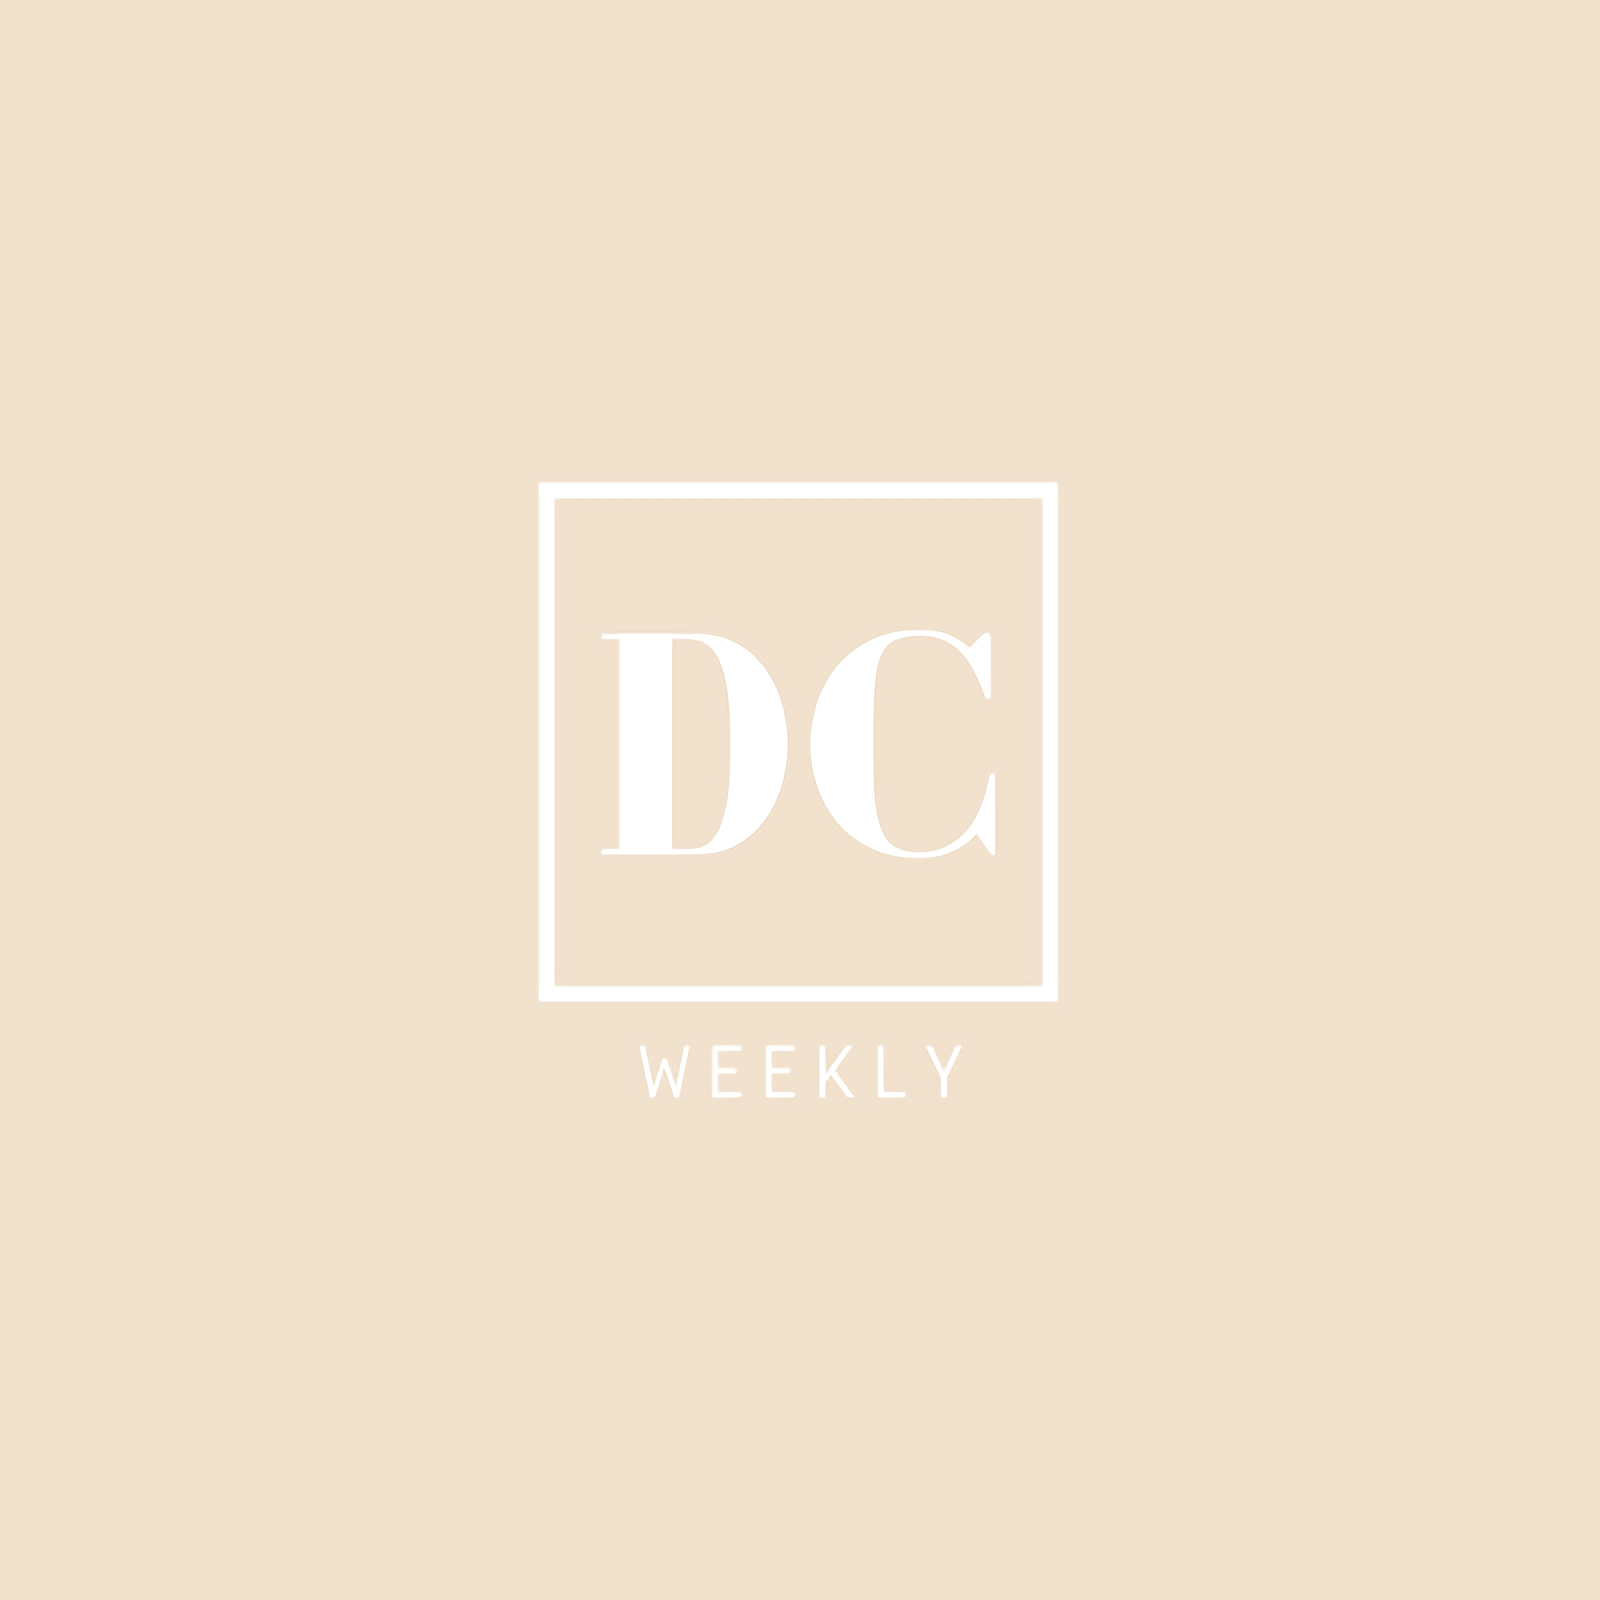 DC weekly